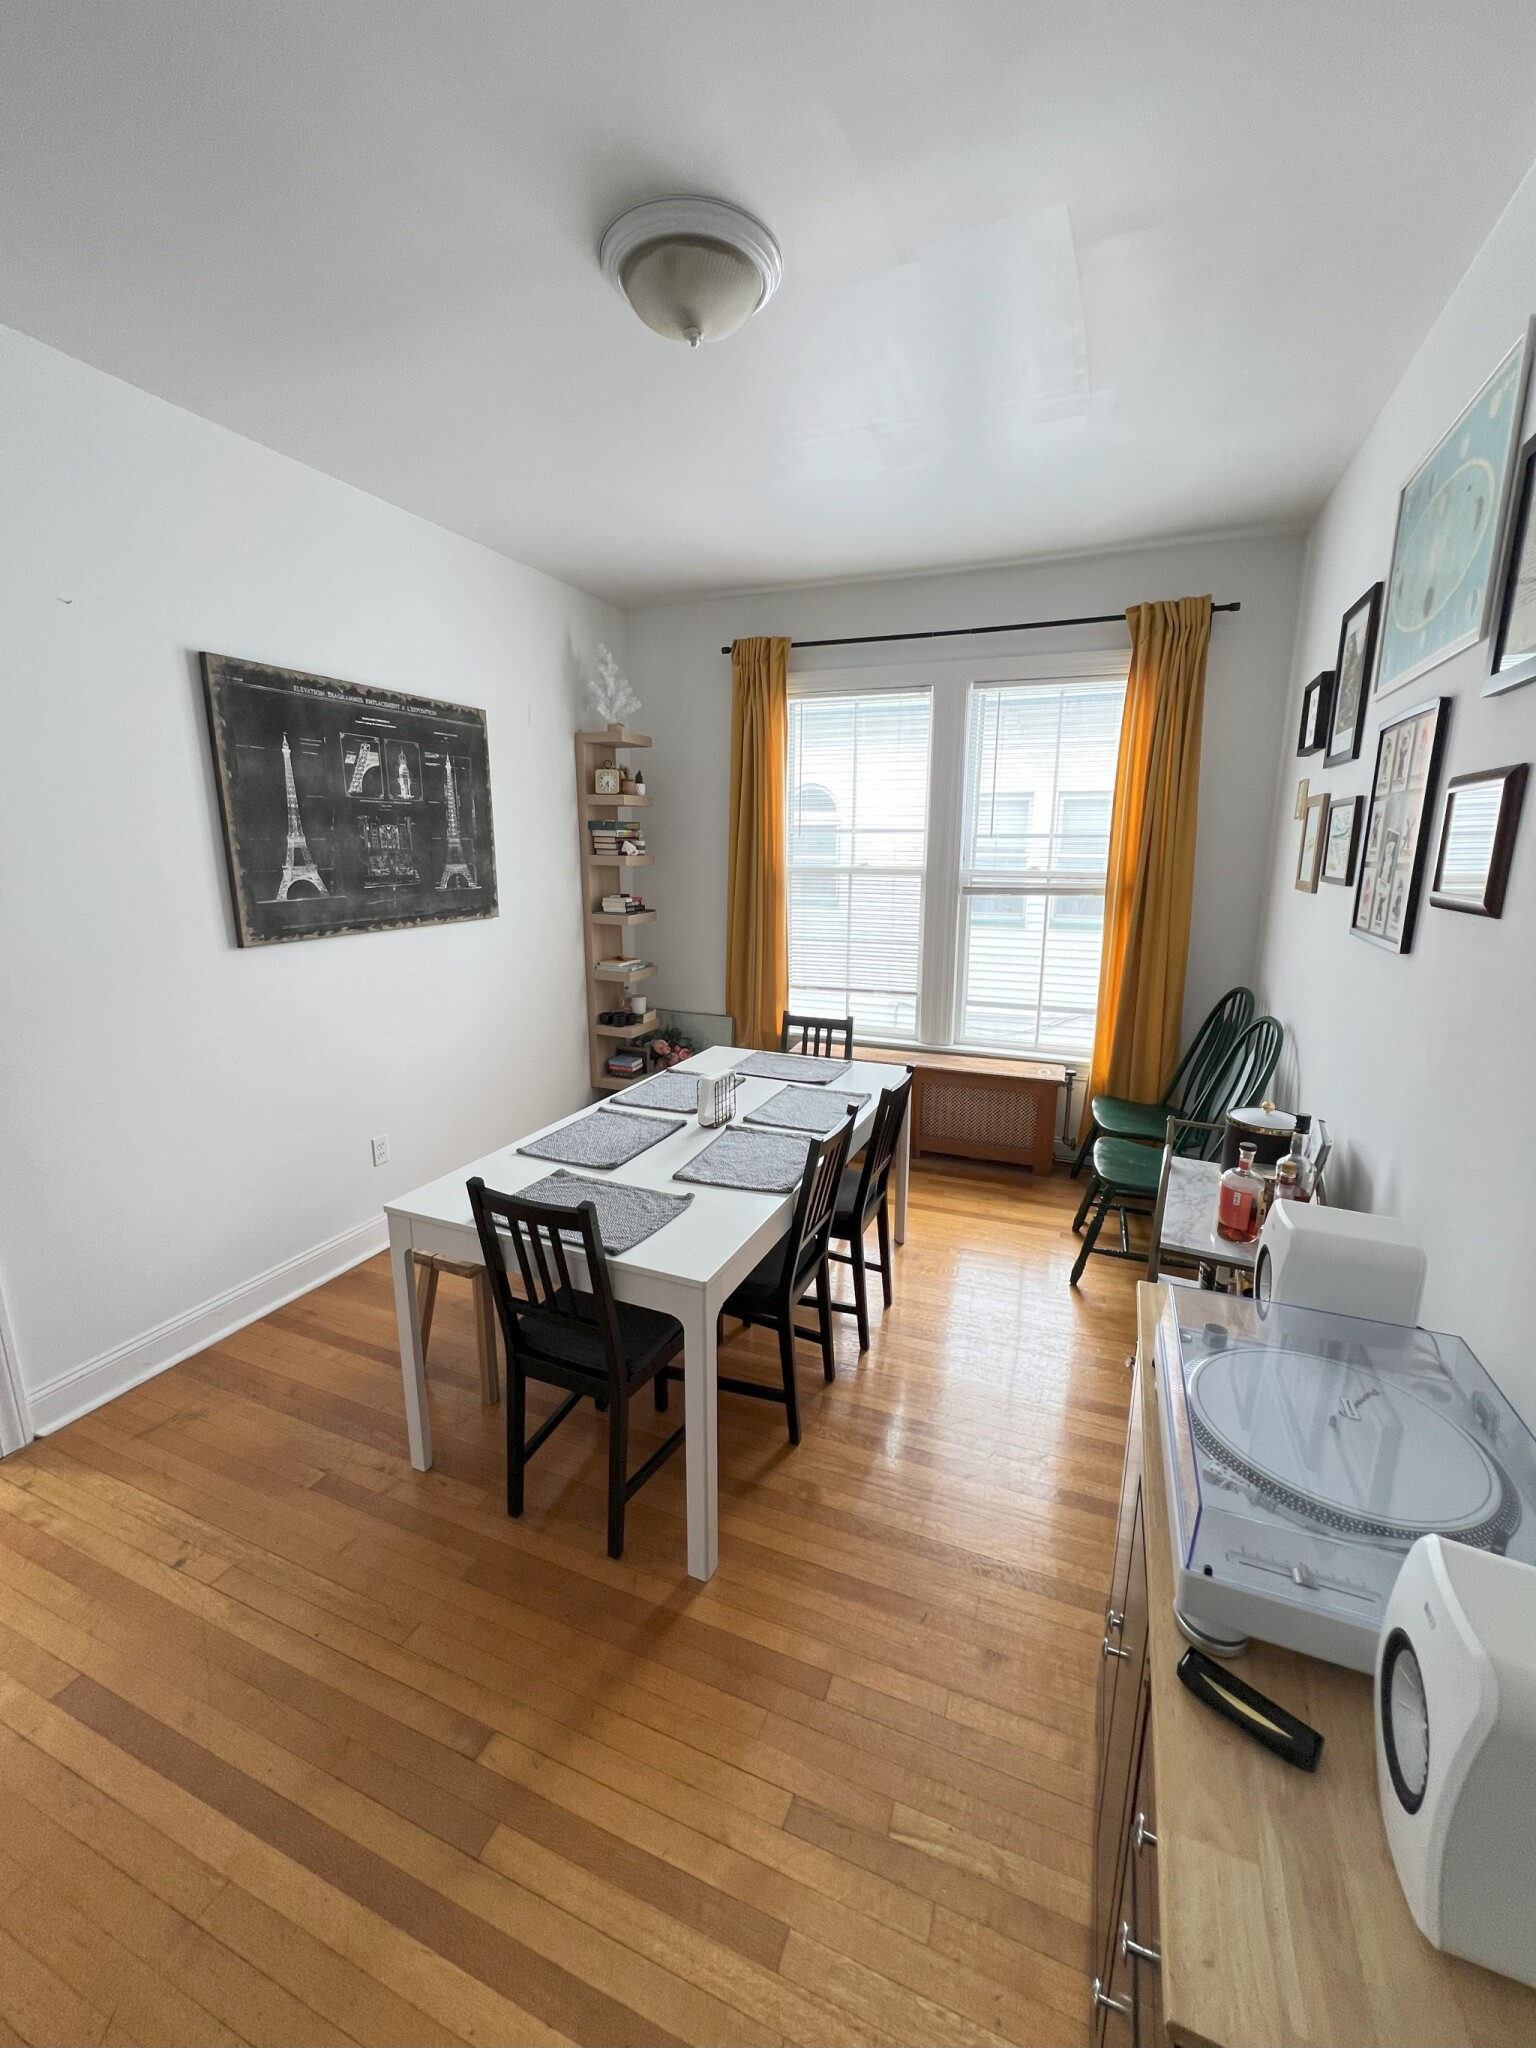 Photos of apartment on Plymouth St.,Cambridge MA 02141